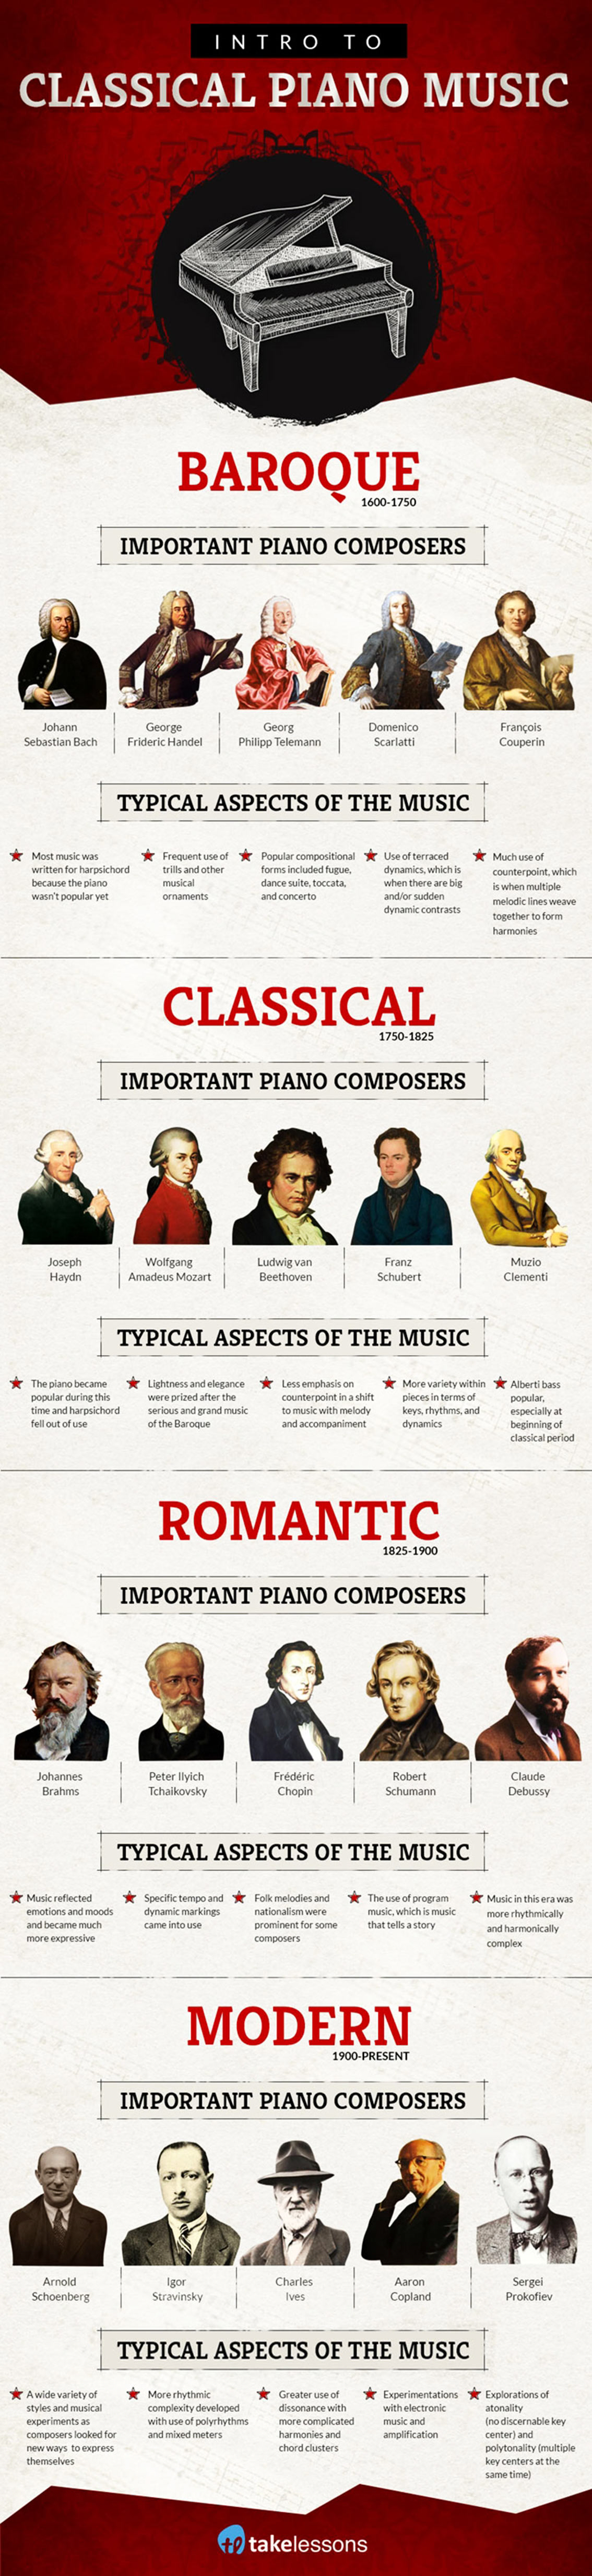 Important Classical Music Composers of All Time Infographic